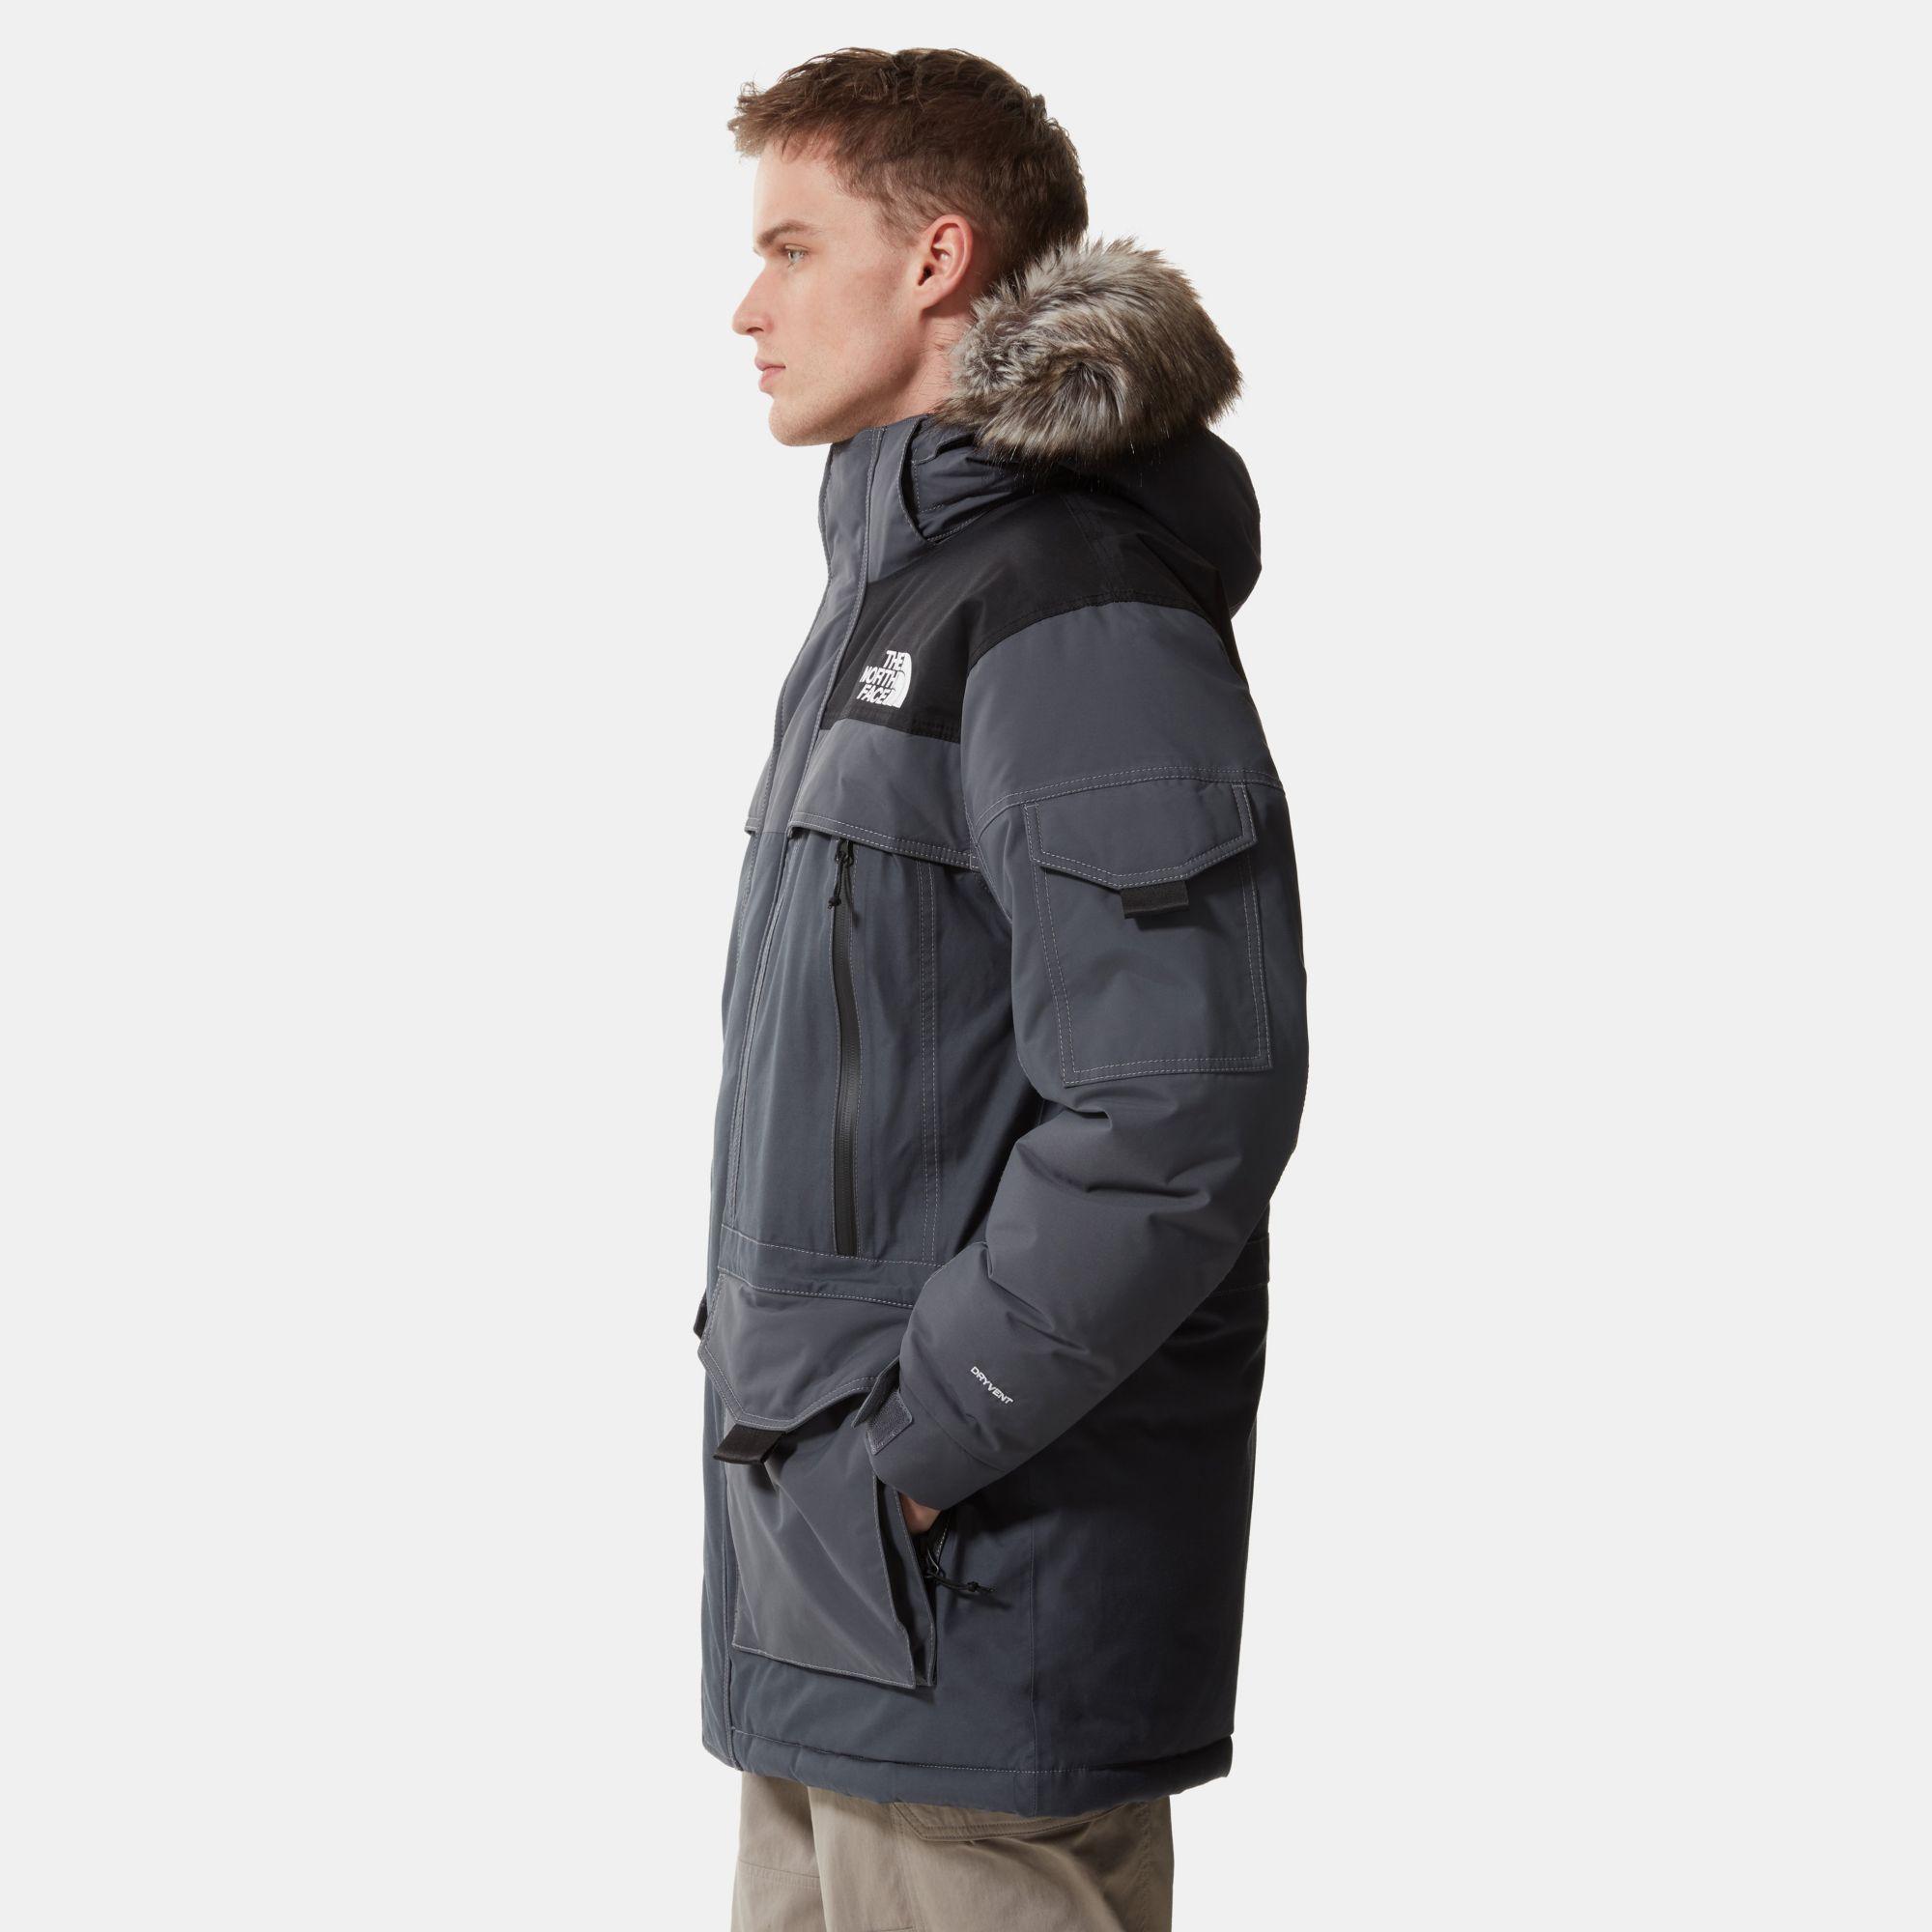 The North Face Mcmurdo 2 Parka in Grey (Grey) for Men - Lyst